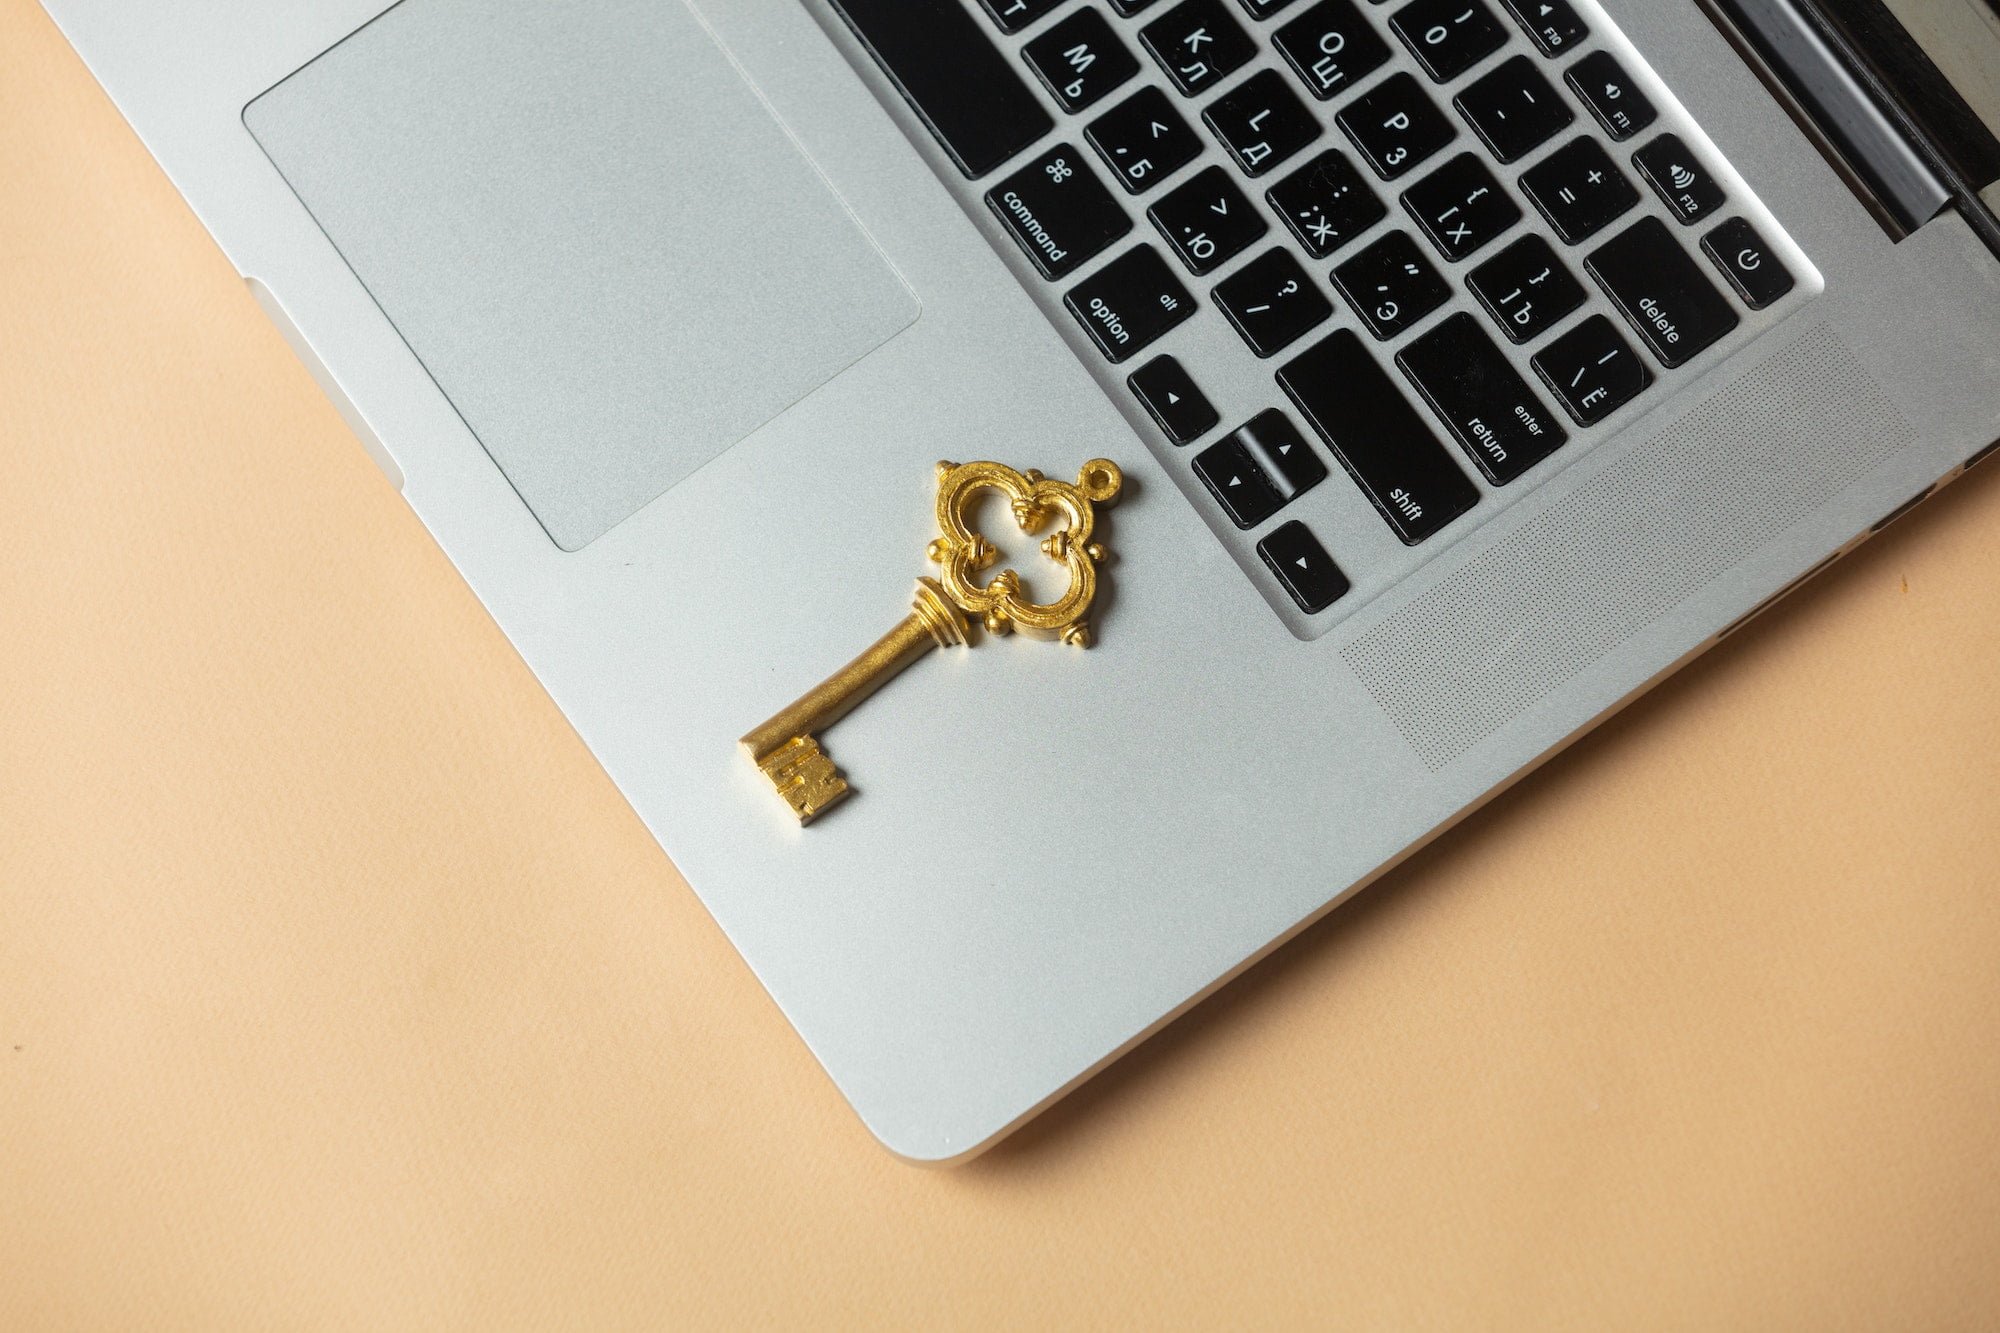 Golden key on laptop computer, above view